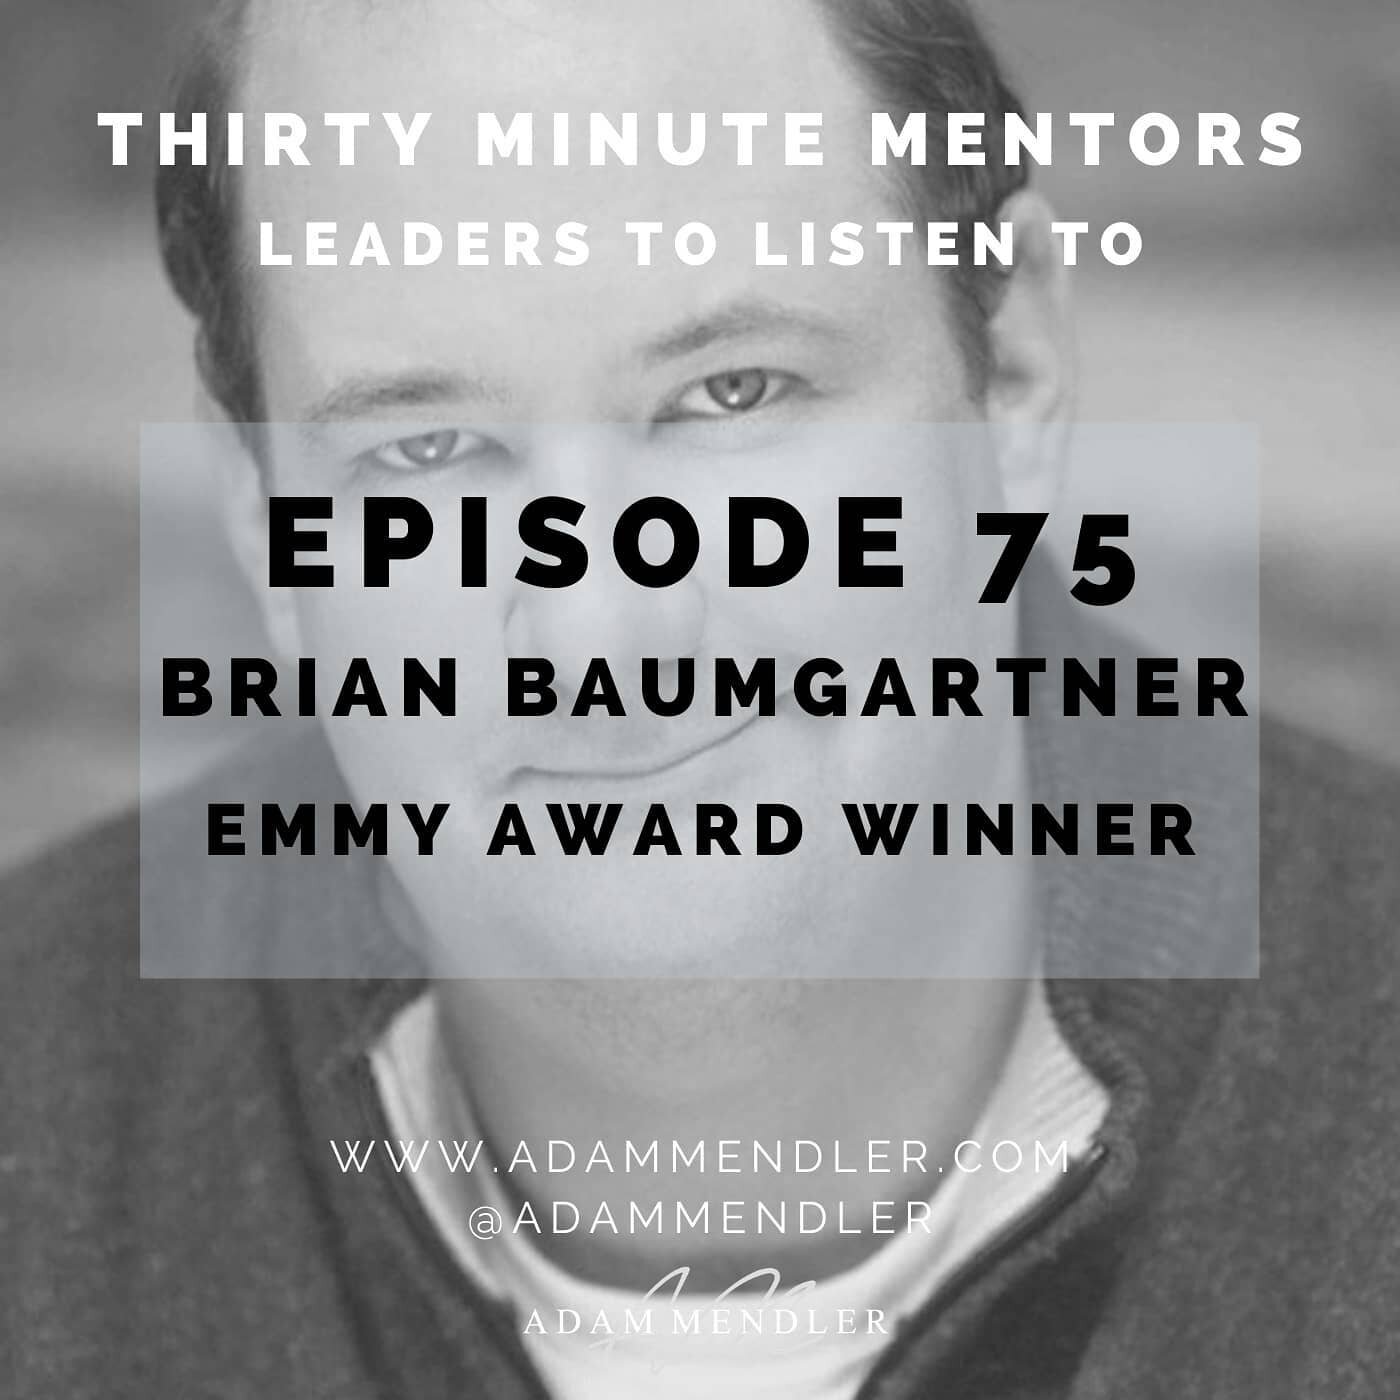 Brian Baumgartner aka Kevin on @theoffice joined me on Episode 75 of Thirty Minute Mentors. We covered a wide range of topics, including the journey leading up to and through The Office, lessons on leadership, teamwork, hiring and culture from his ti